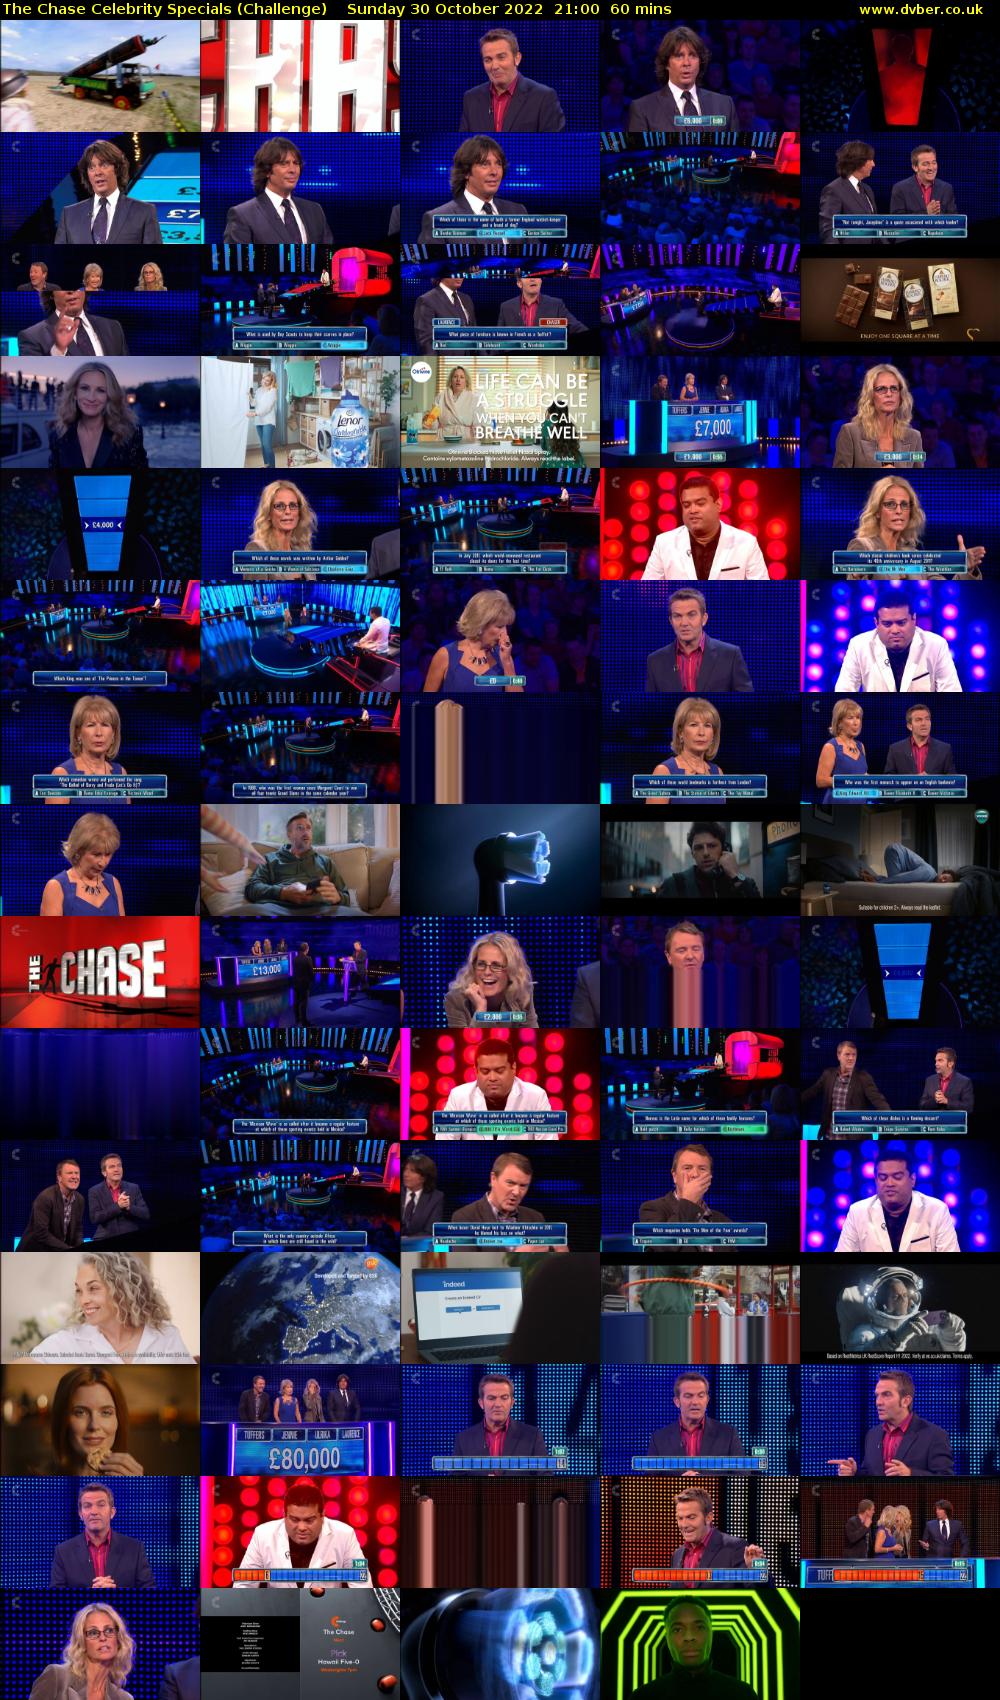 The Chase Celebrity Specials (Challenge) Sunday 30 October 2022 21:00 - 22:00